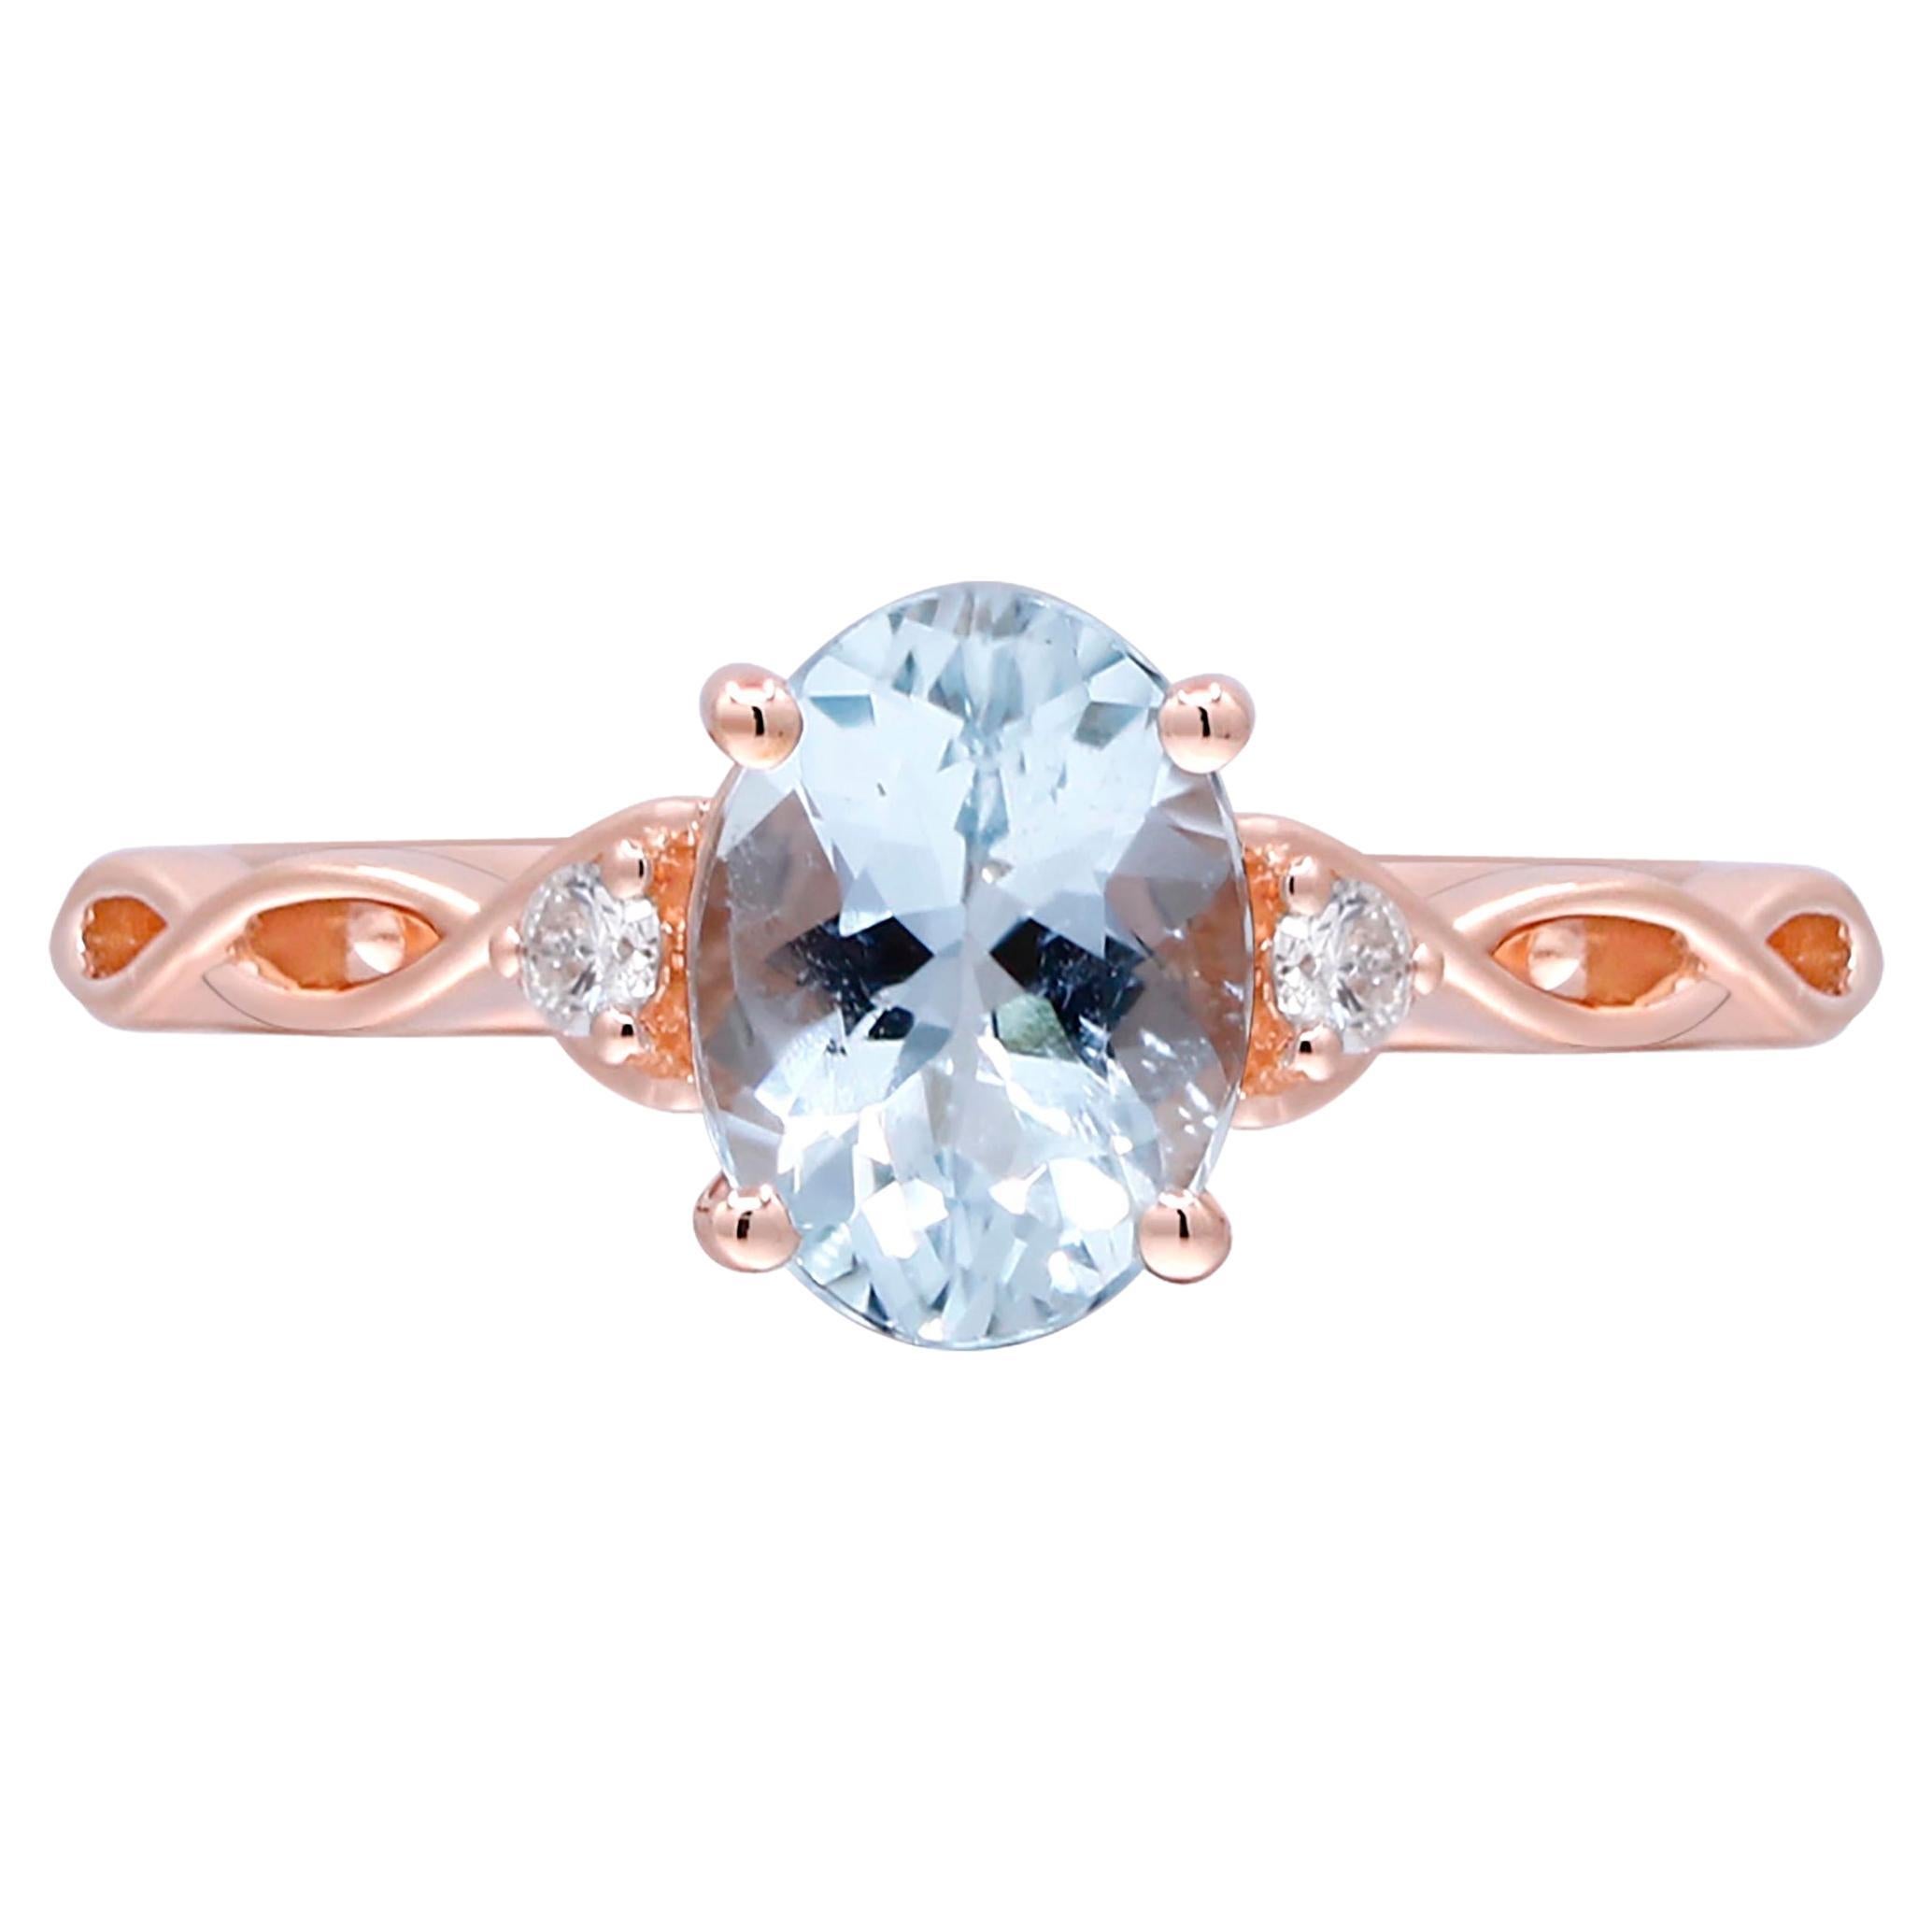 1.09 Carat Oval-Cut Aquamarine with Diamond Accents 14K Rose Gold Ring